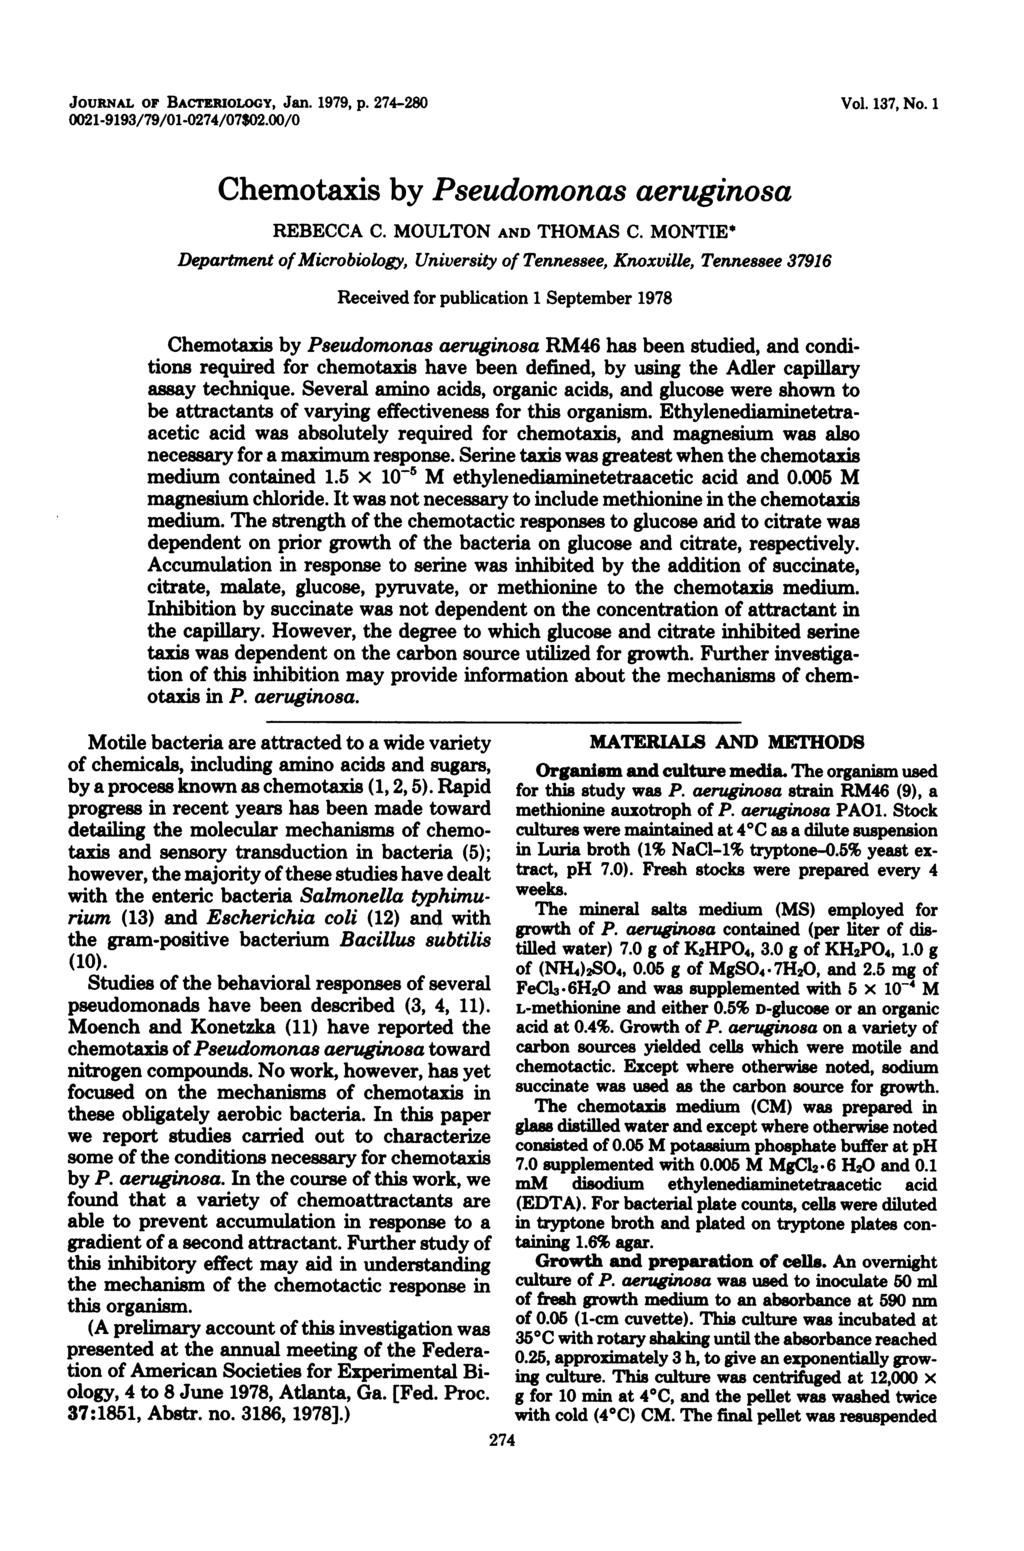 JOURNAL OF BACTERIOLOGY, Jan. 1979, p. 274-280 0021-9193/79/01-0274/07$02.00/0 Vol. 137, No. 1 Chemotaxis by Pseudomonas aeruginosa REBECCA C. MOULTON AND THOMAS C.